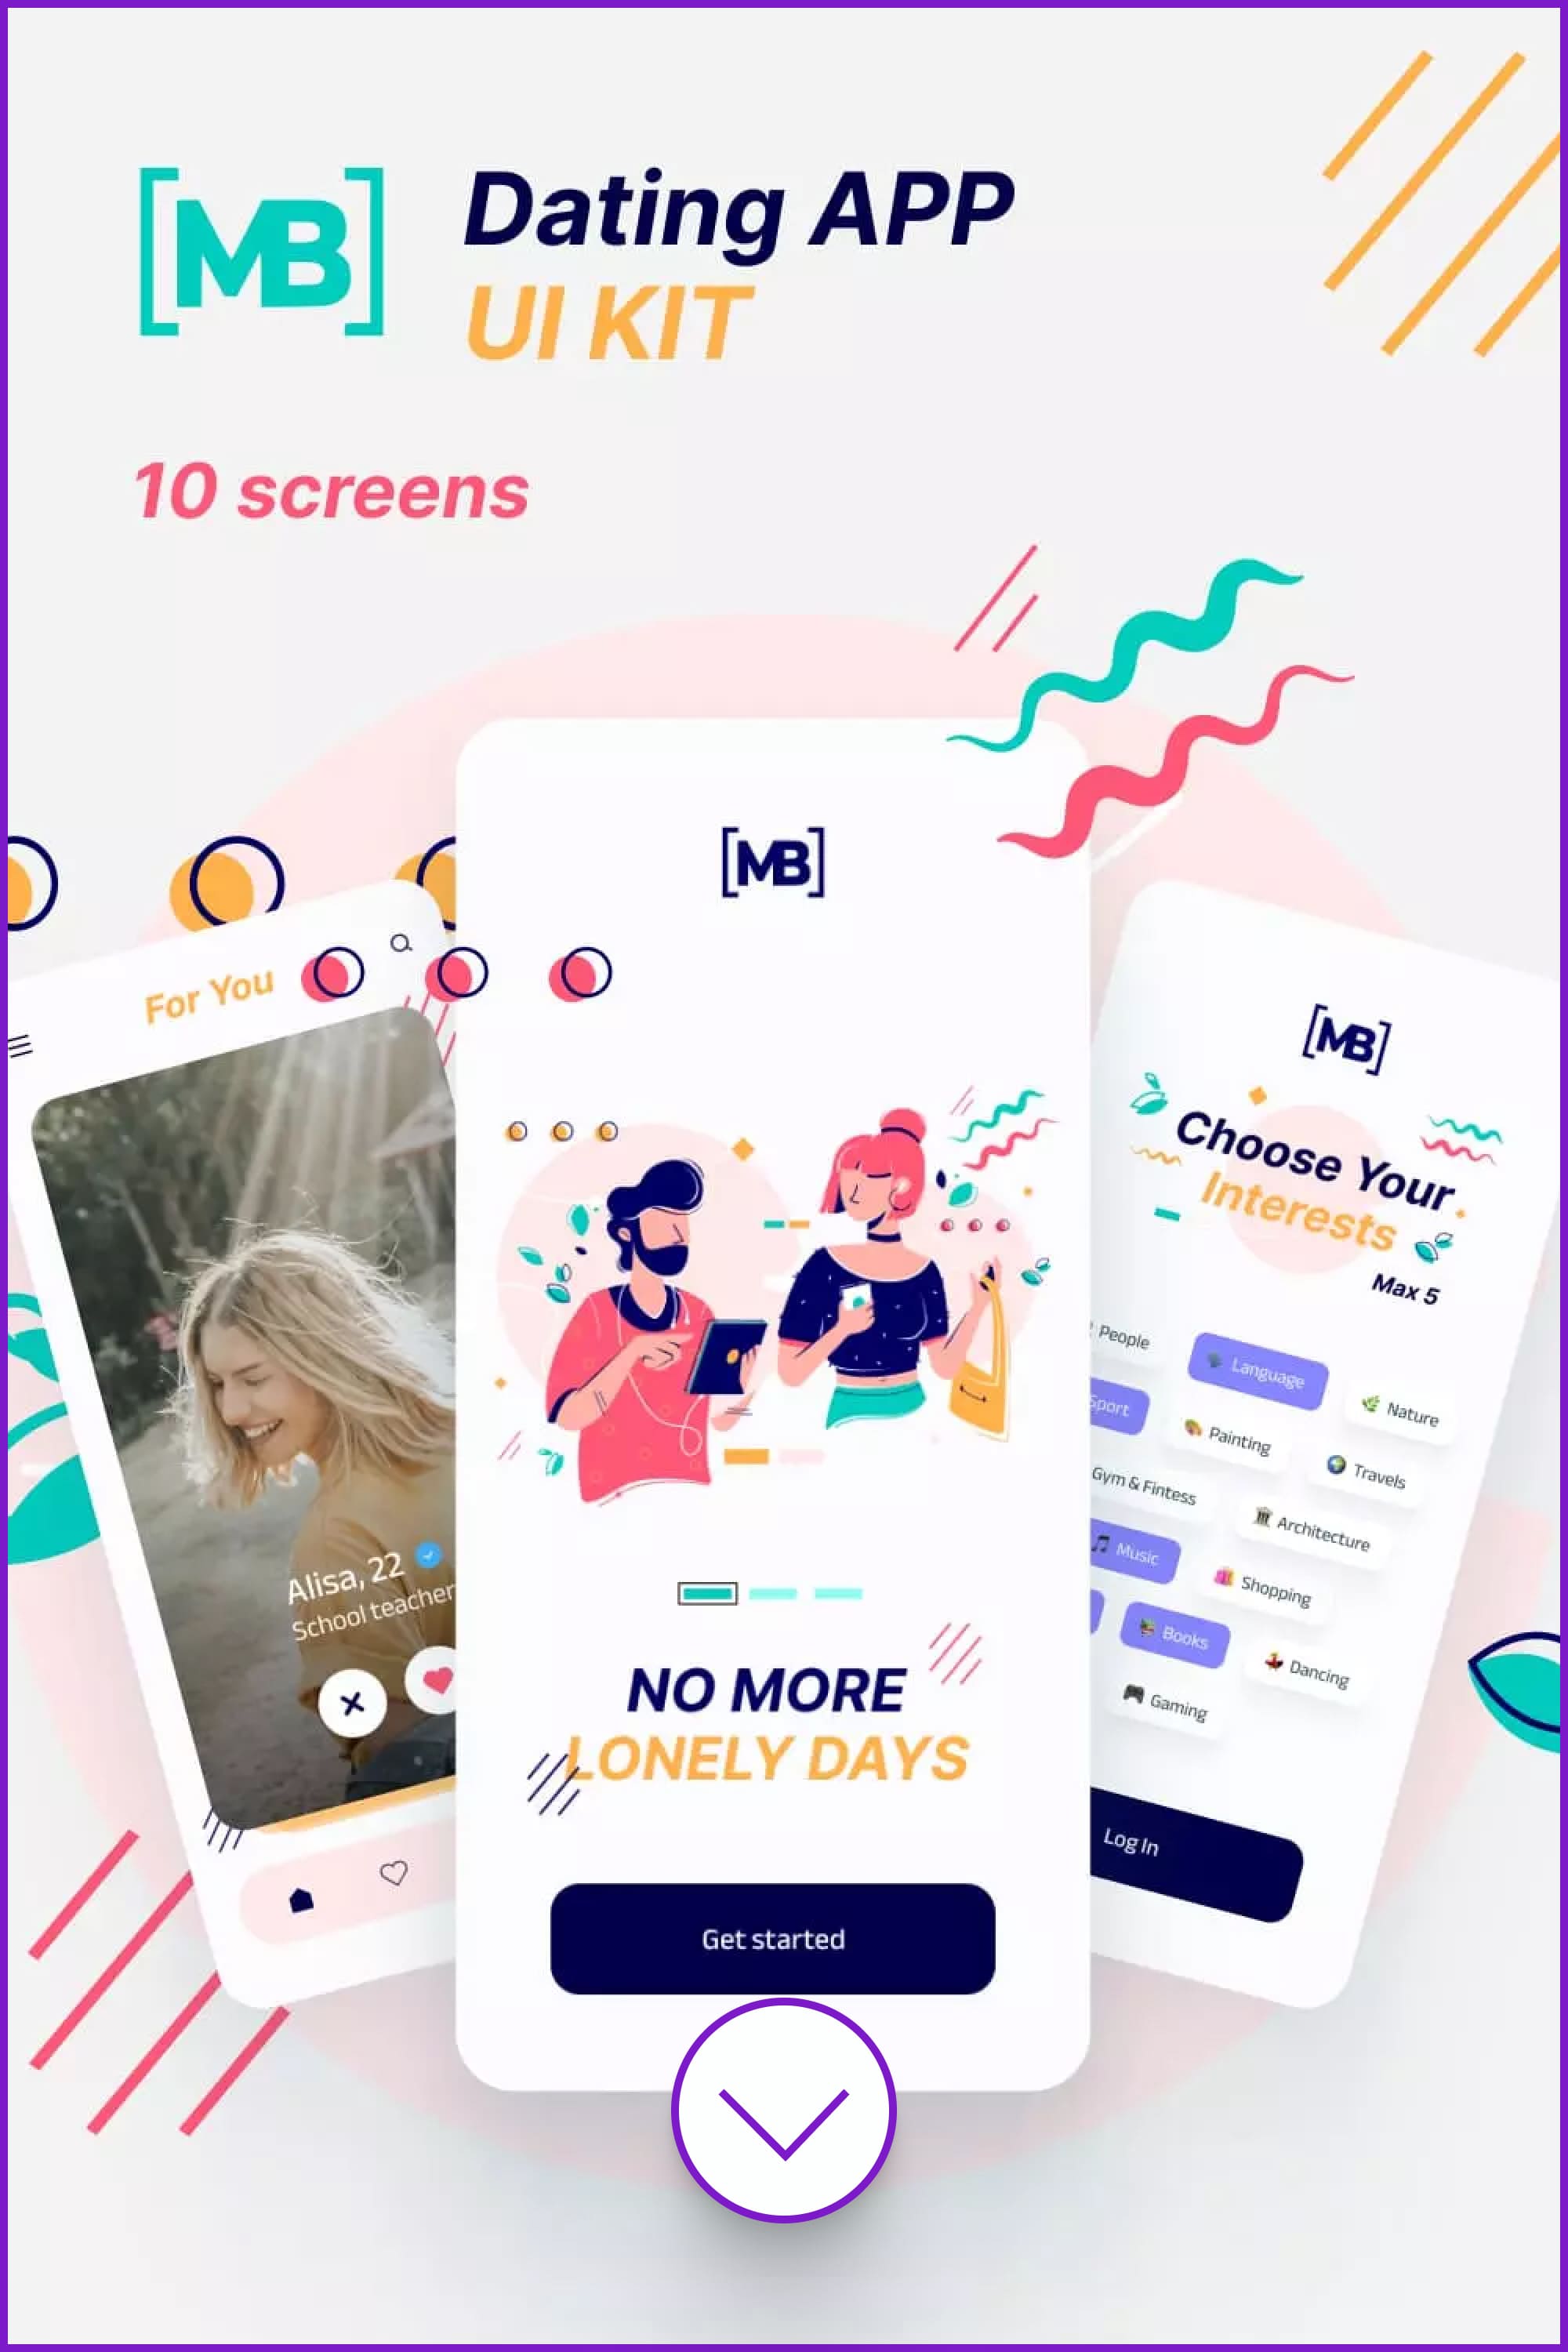 Screenshots of dating app with bright flat illustrations.